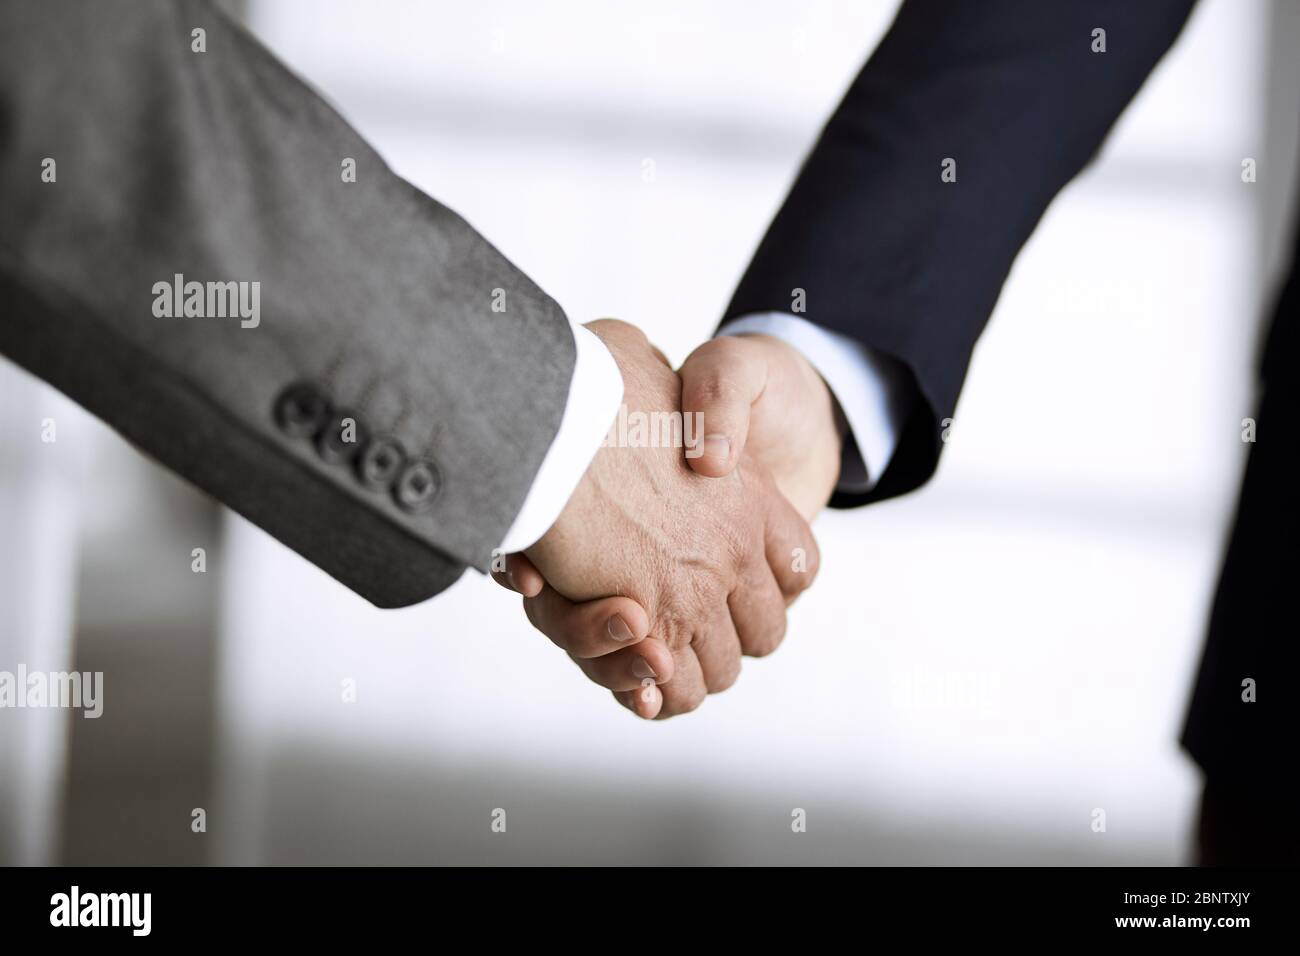 Business people in office suits standing and shaking hands, close-up. Business communication concept. Handshake and marketing Stock Photo